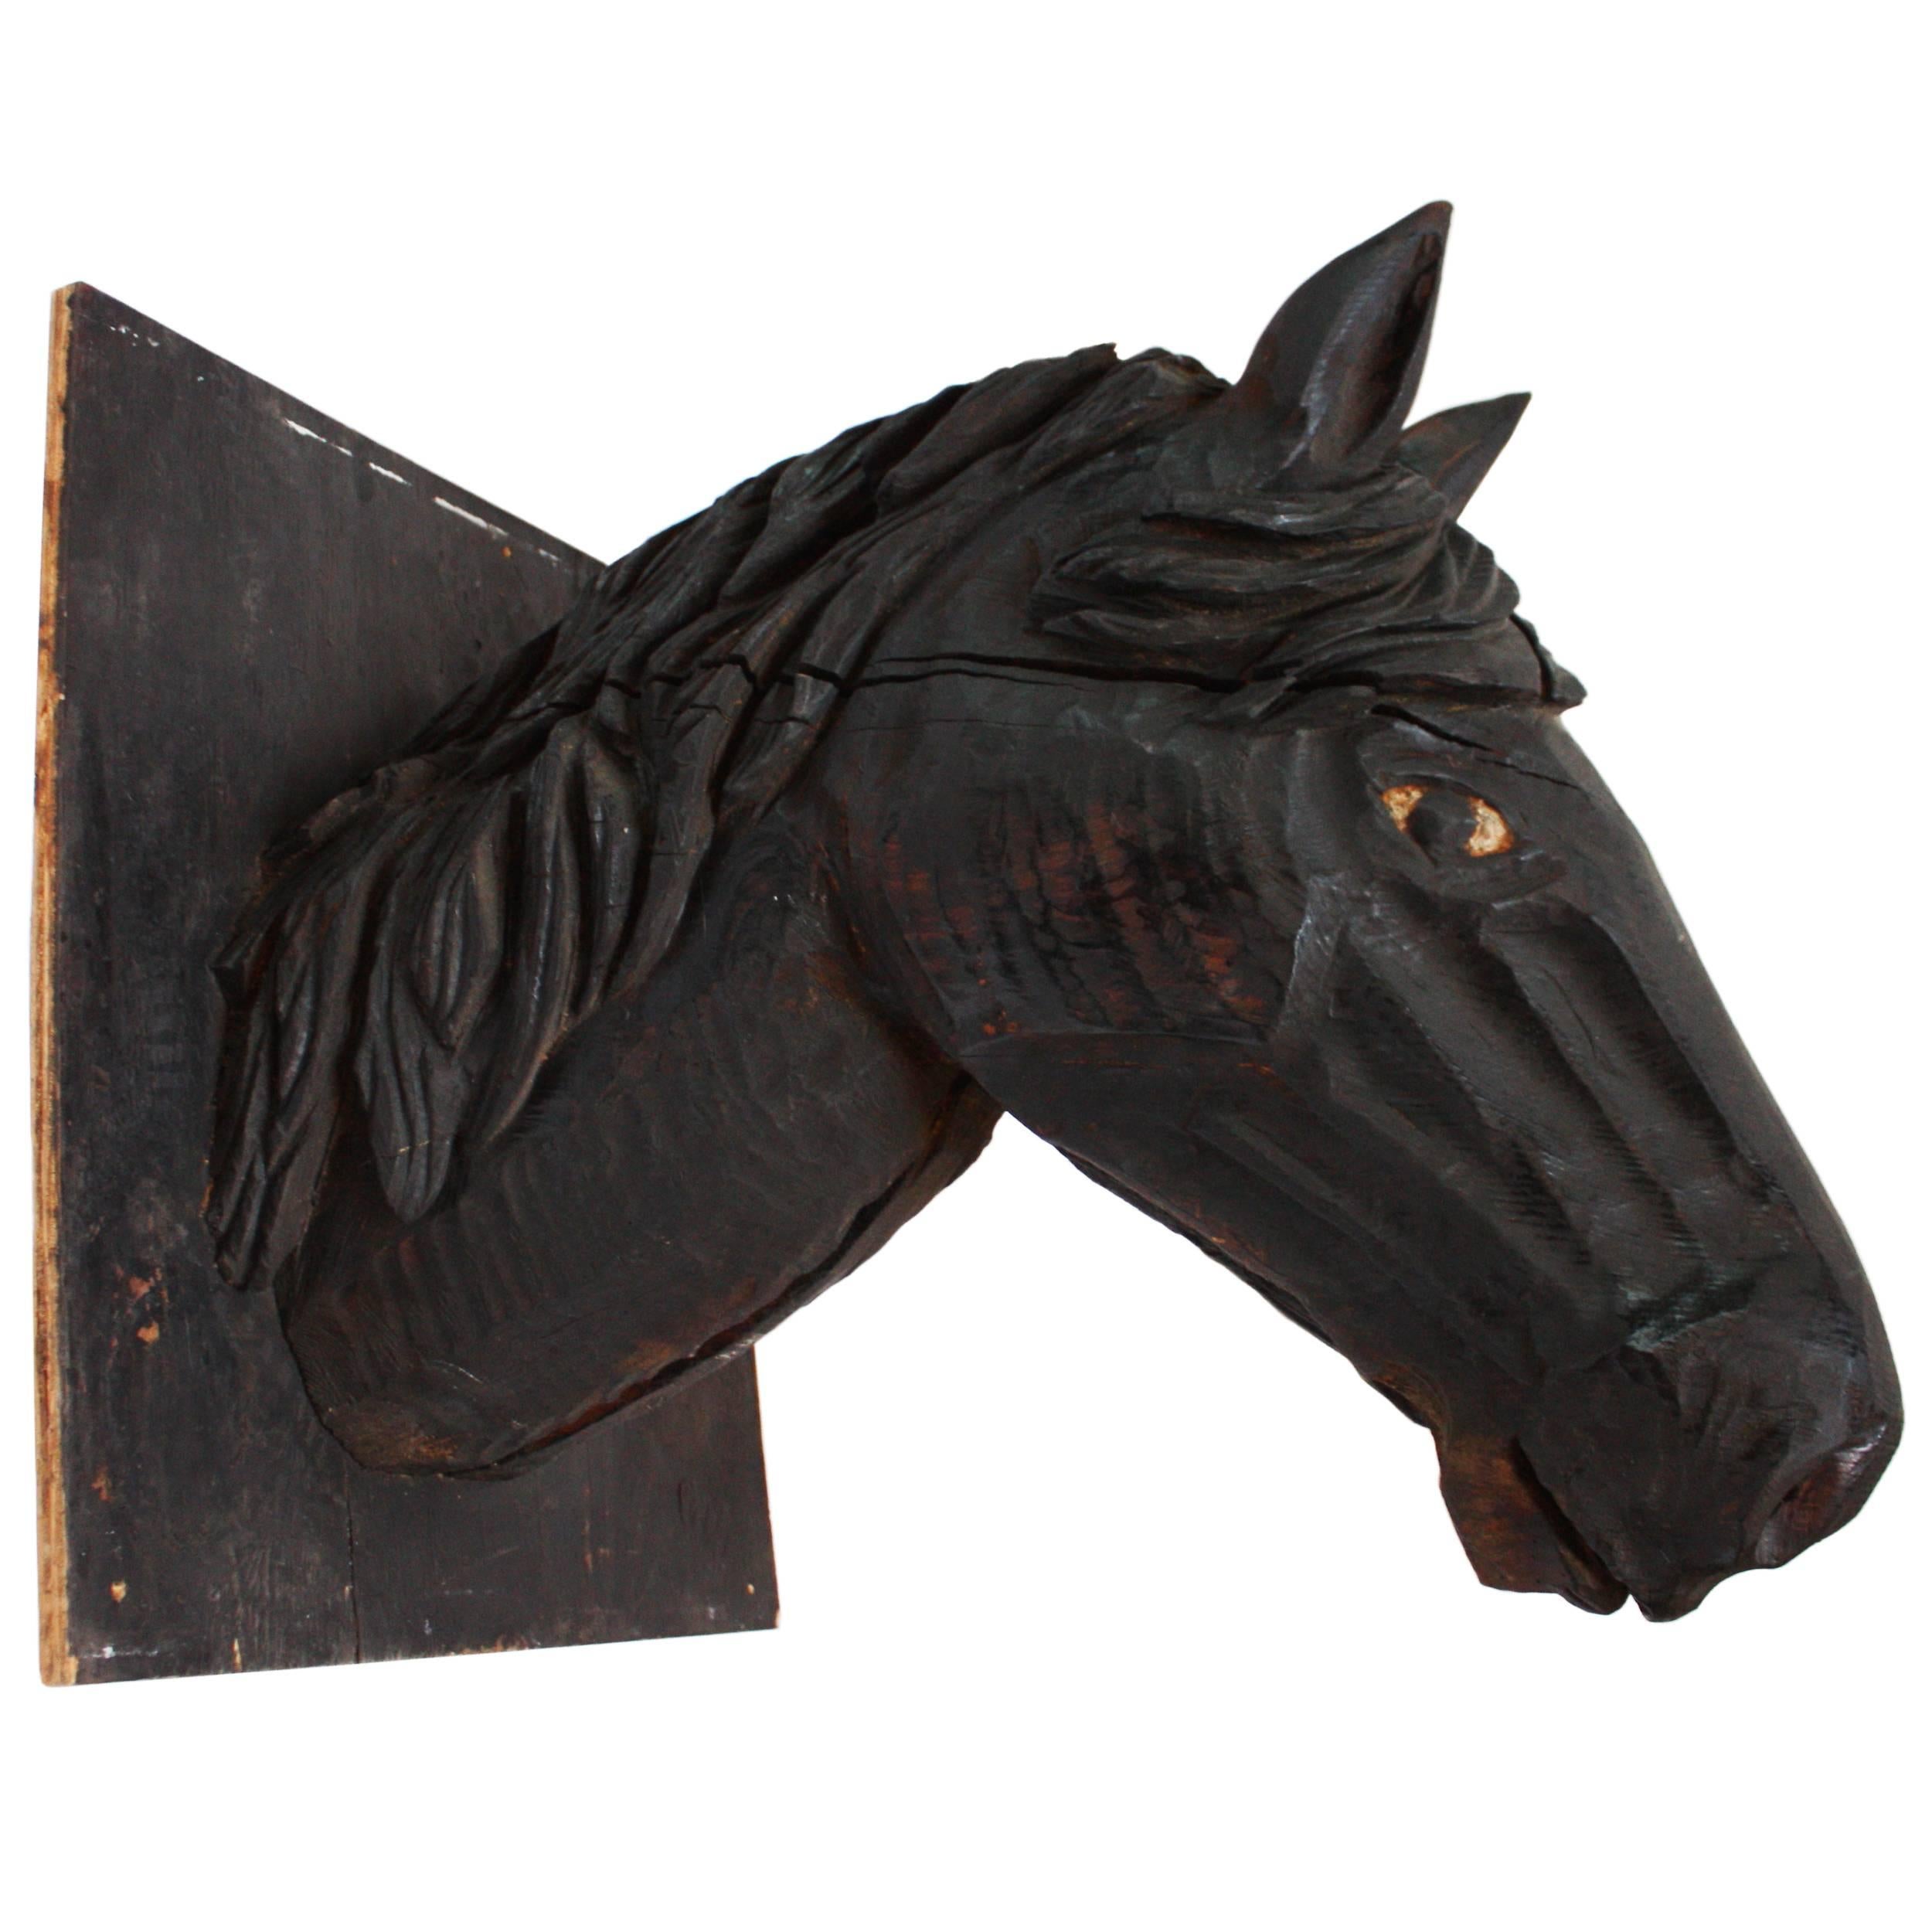 Mountable Hand-Carved Horse Head Trade Sign